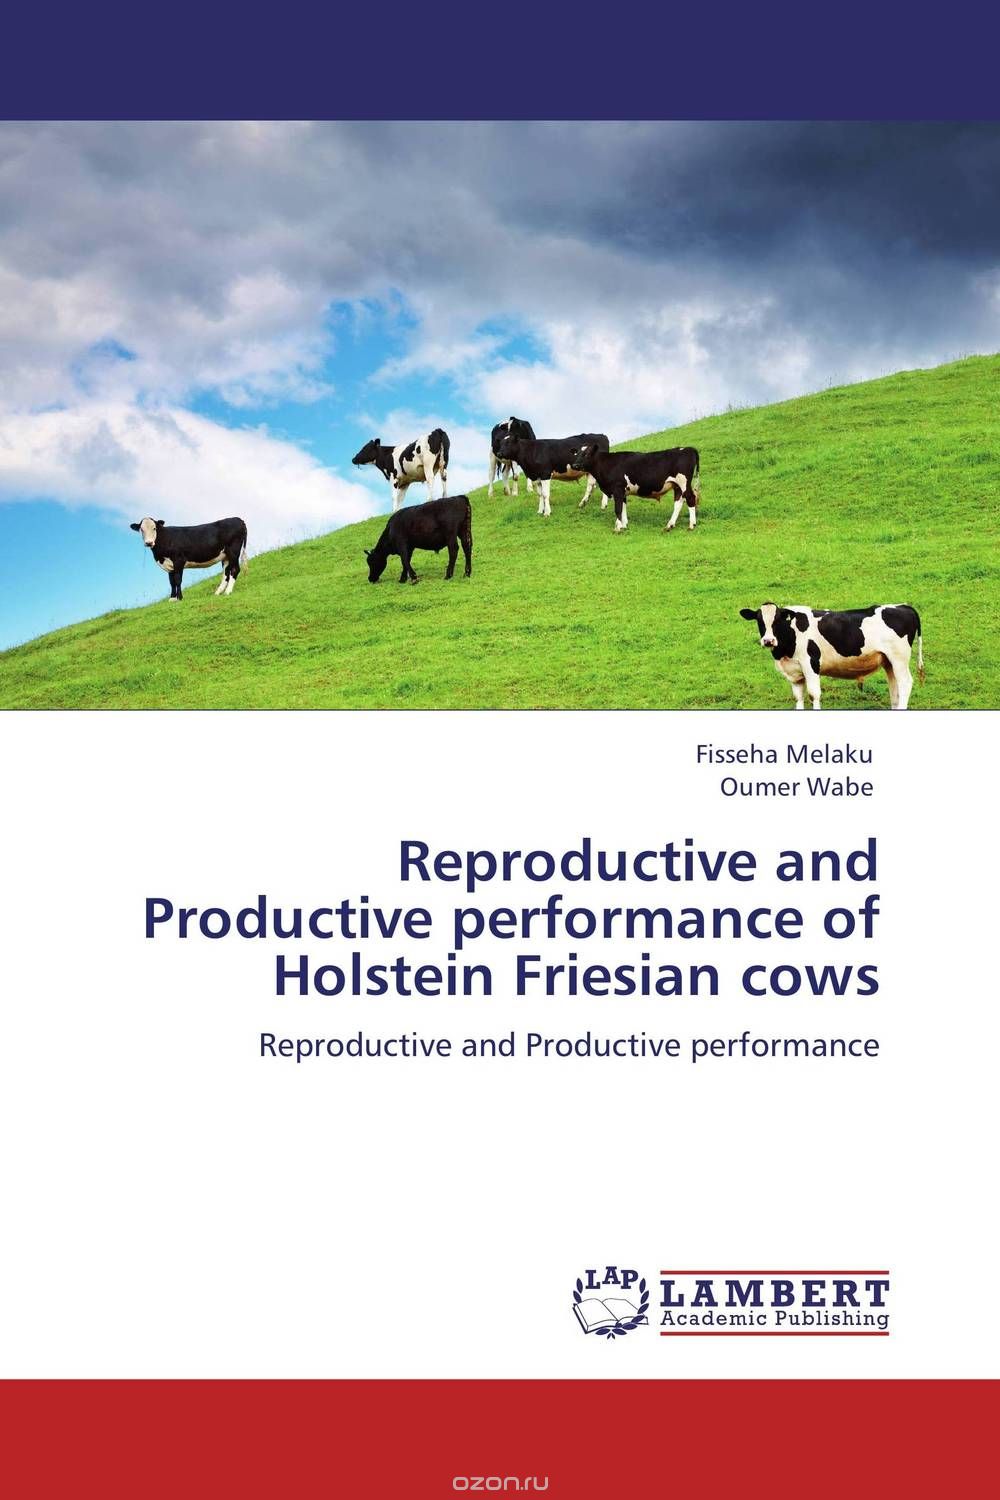 Reproductive and Productive performance of Holstein Friesian cows